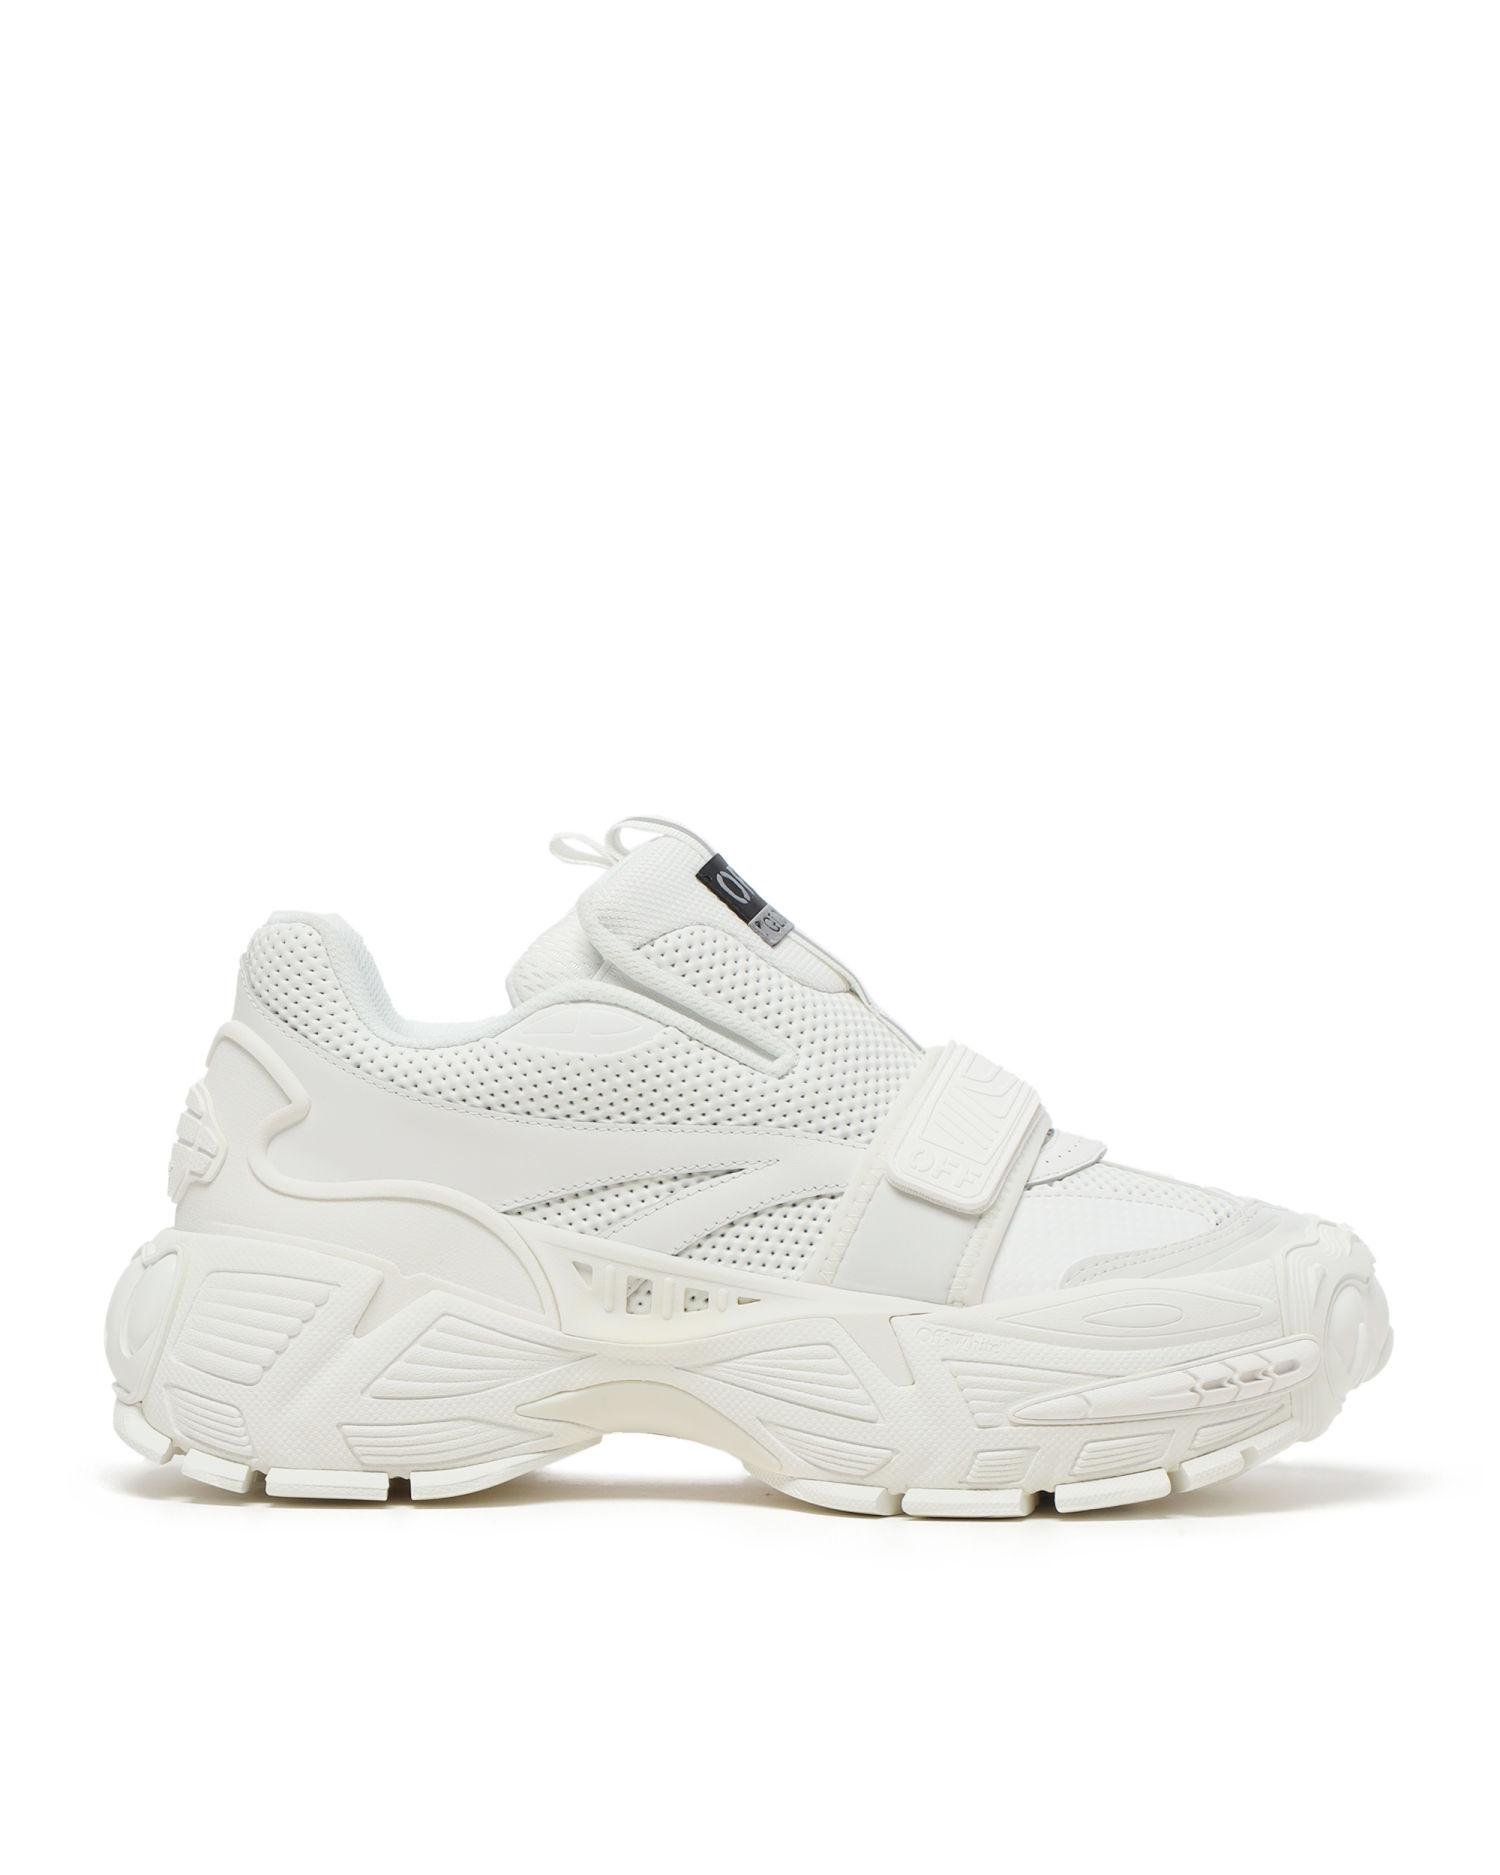 Glove slip on sneakers by OFF-WHITE